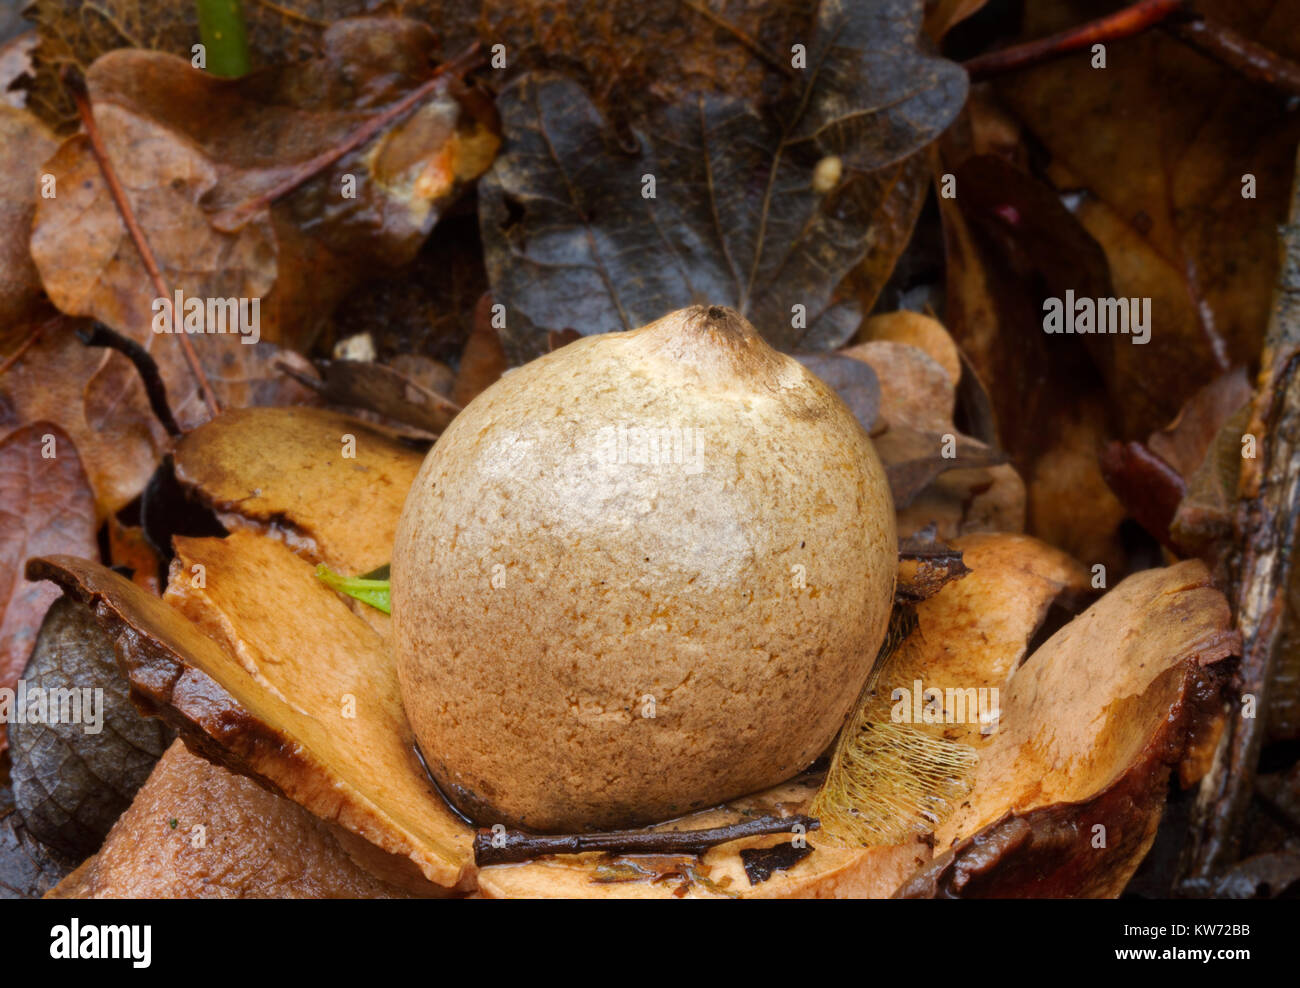 Puffball of Collared earthstar in leaf litter Stock Photo